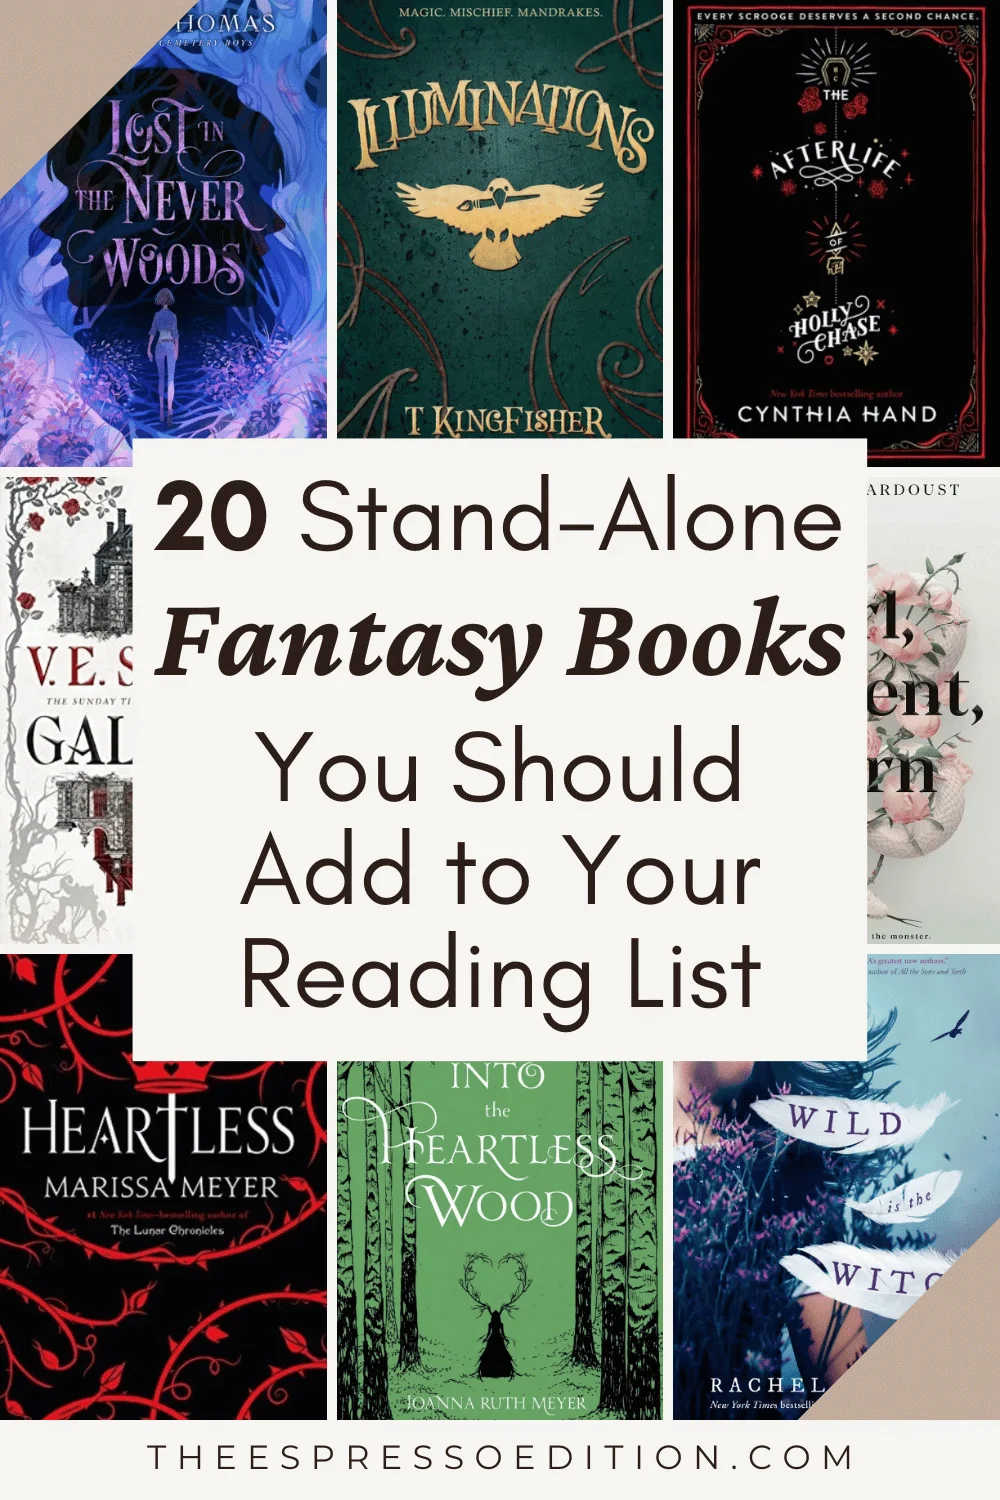 20 Stand-Alone Fantasy Books You Should Add to Your Reading List by The Espresso Edition cozy bookish blog